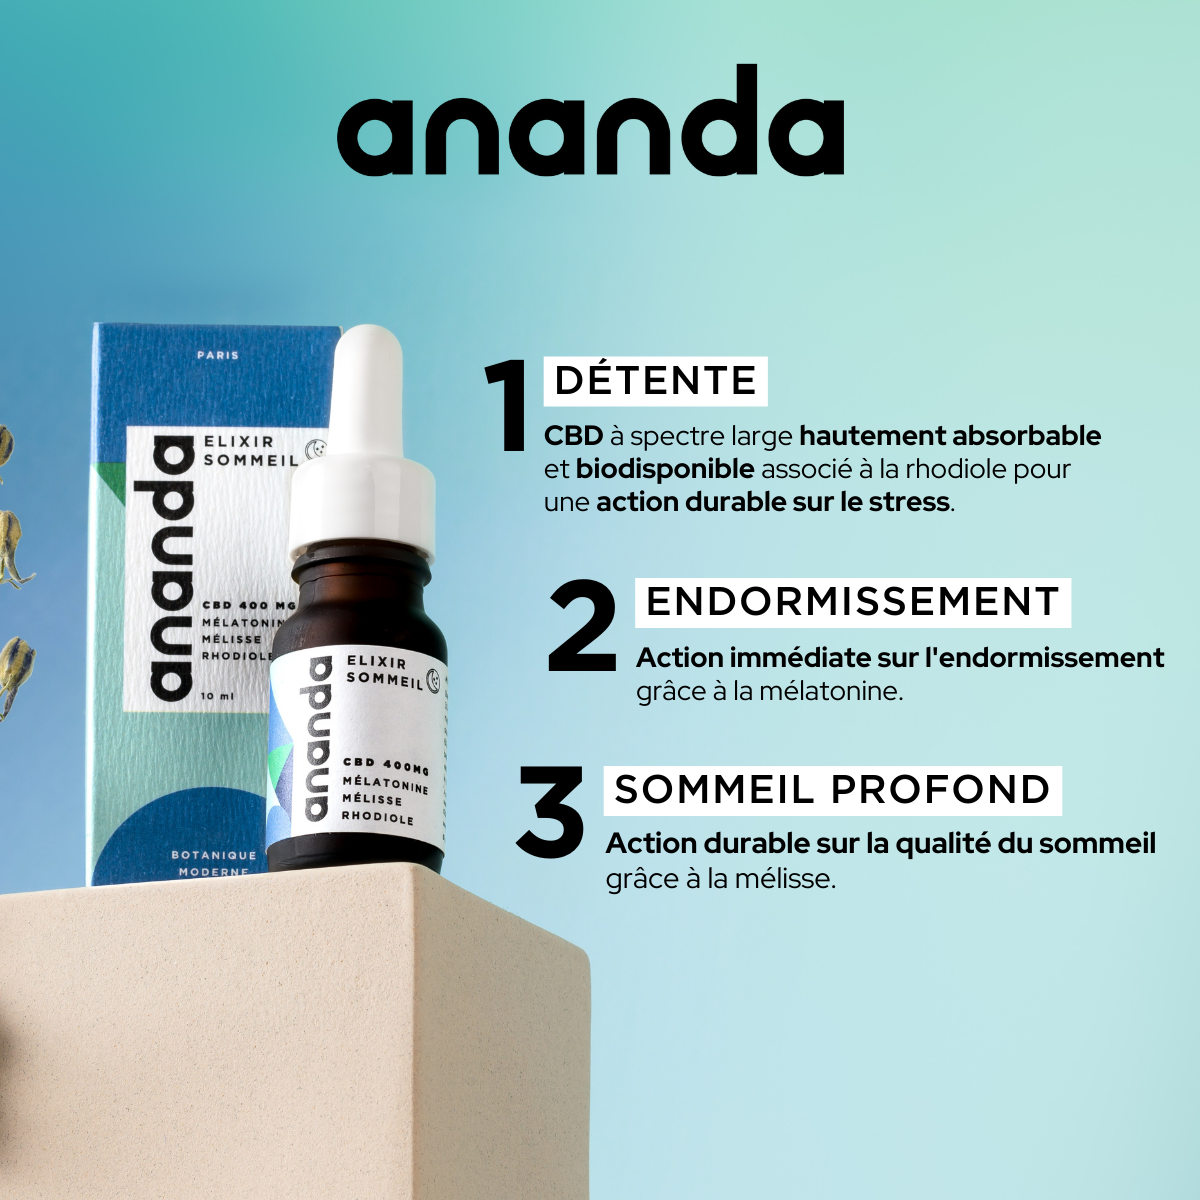 Elixir Sommeil by Ananda